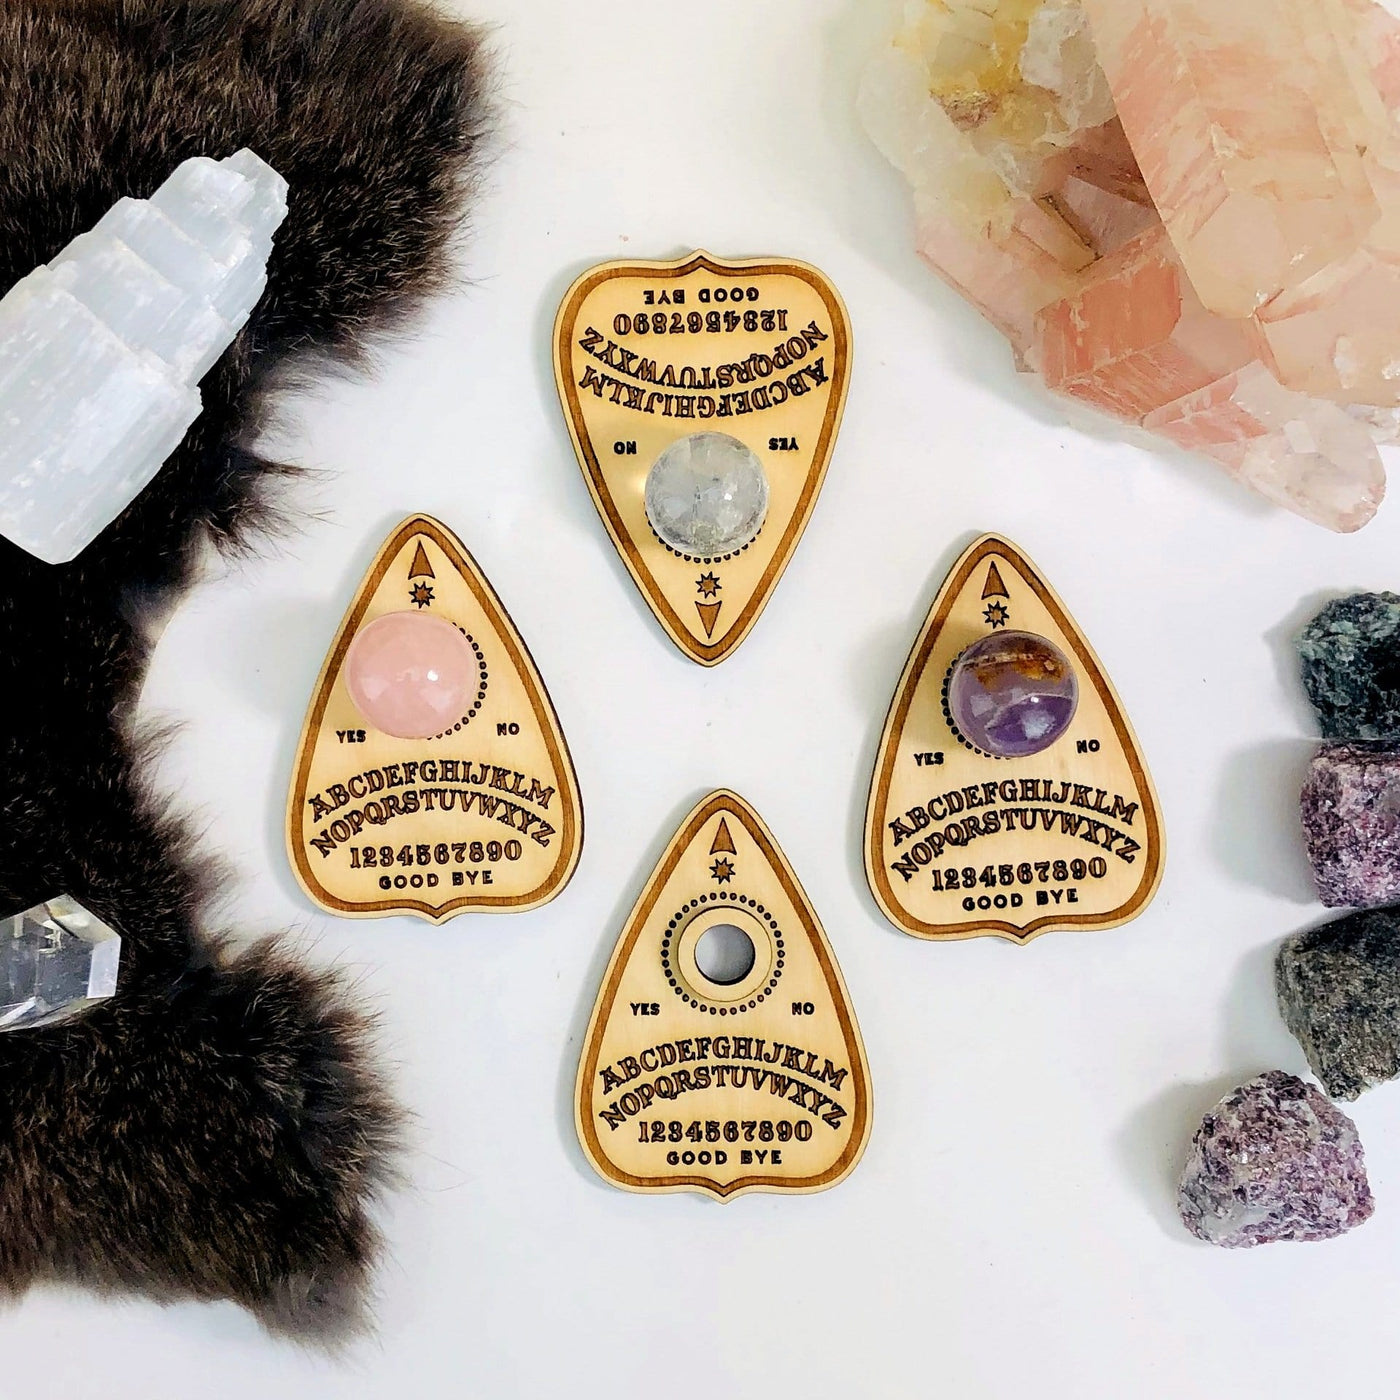 4 Planchette Light Wooden Sphere Stand on display with a small sphere in Rose quartz , Crystal quartz, and Amethyst .